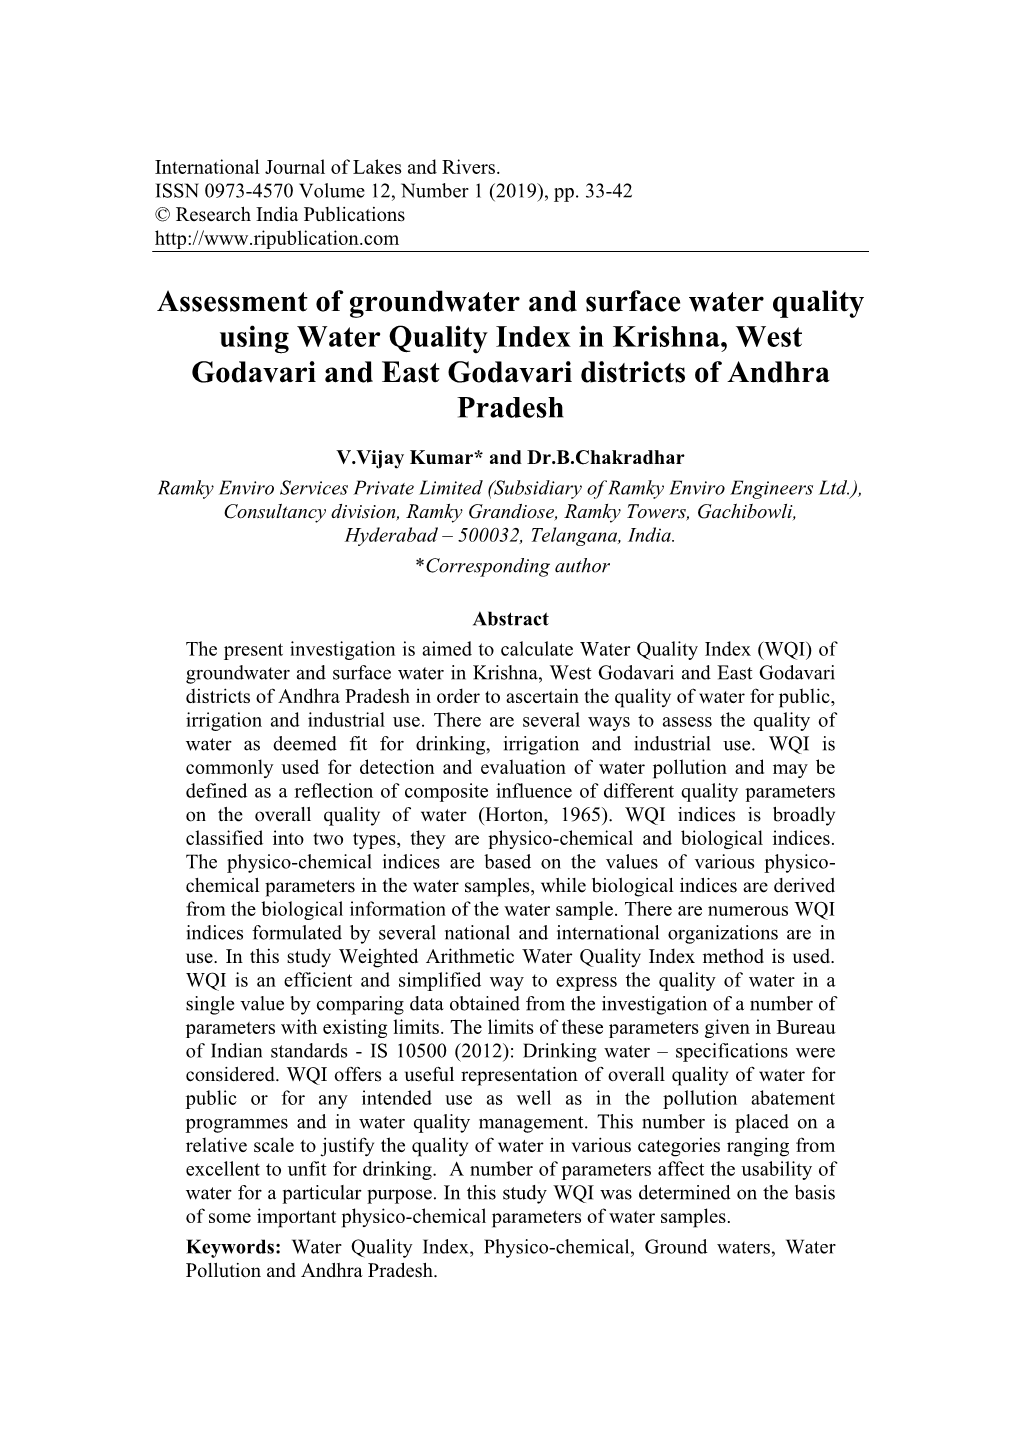 Assessment of Groundwater and Surface Water Quality Using Water Quality Index in Krishna, West Godavari and East Godavari Districts of Andhra Pradesh